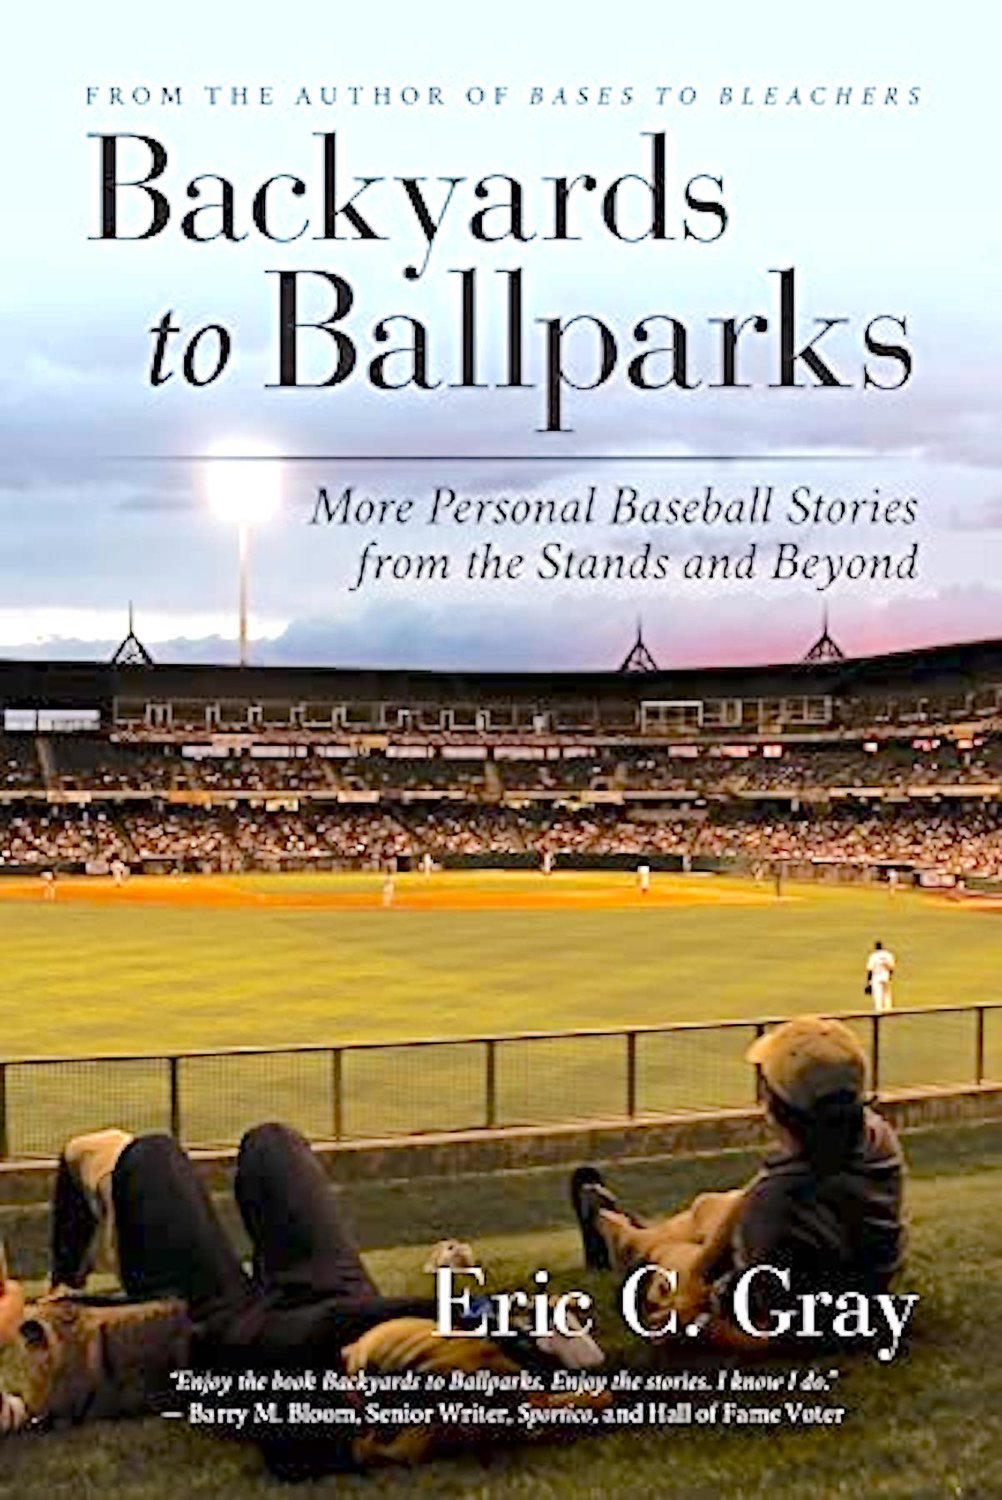 Tuesday at 6:30 p.m., a reading and book signing by Eric C. Gray, author of “Backyards to Ballparks,” will be held at Jervis Public Library